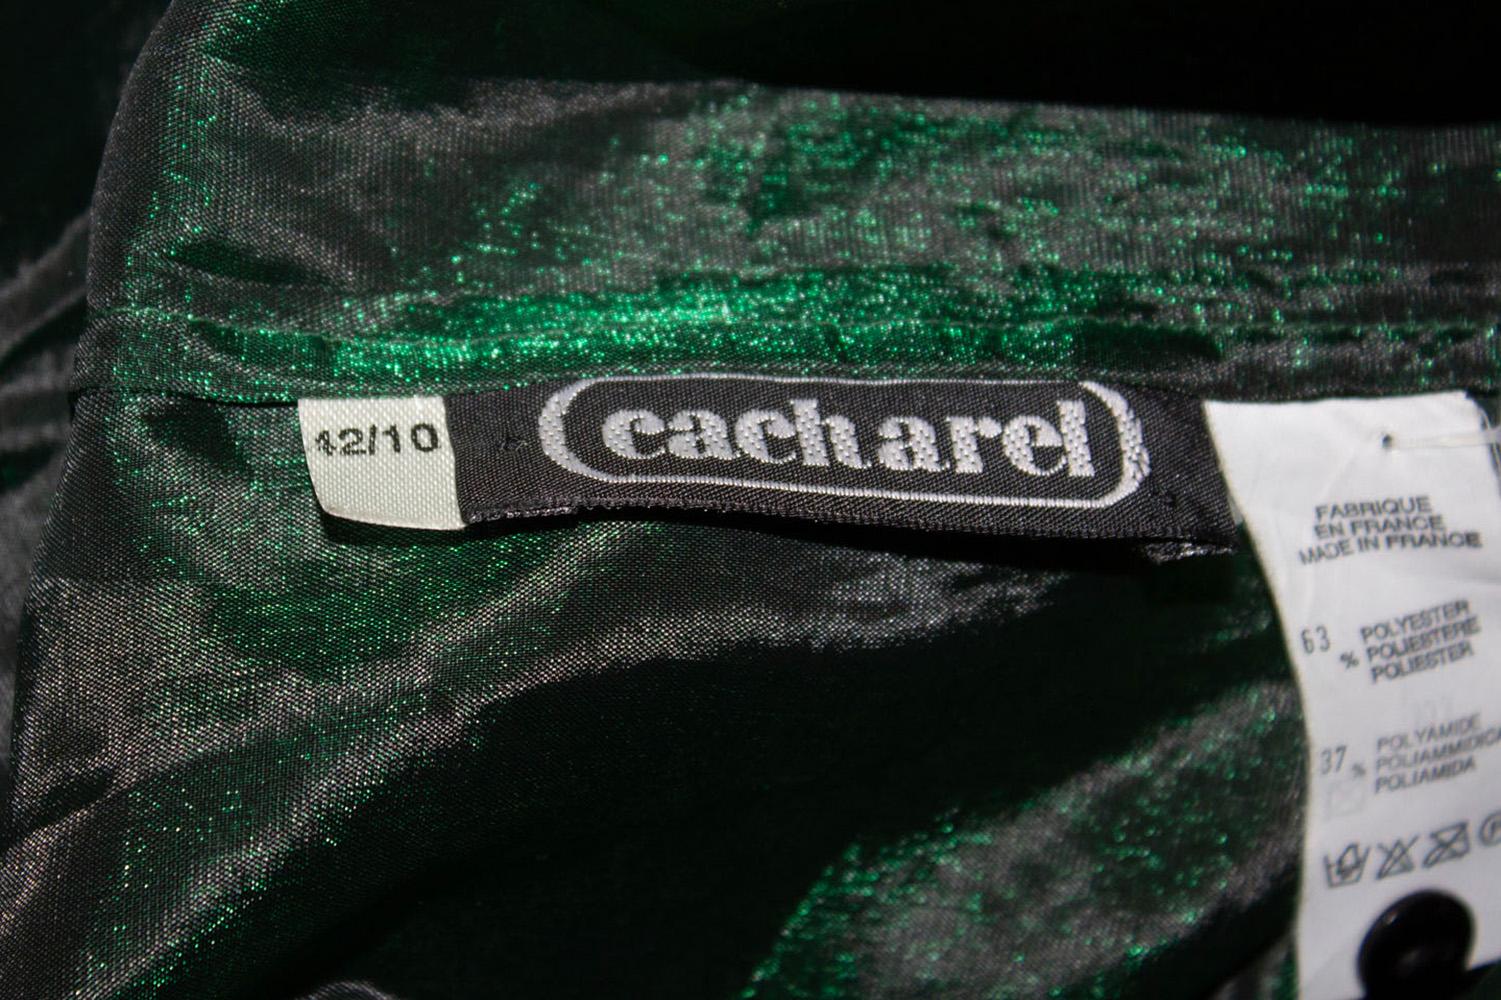 A fabulous shirt for the forthcoming party season by Cacharel. The is in a wonderful Christmas tree green colour and has a front button opening and cut away collar. 
Measurements: Bust 36'', length 22''.
